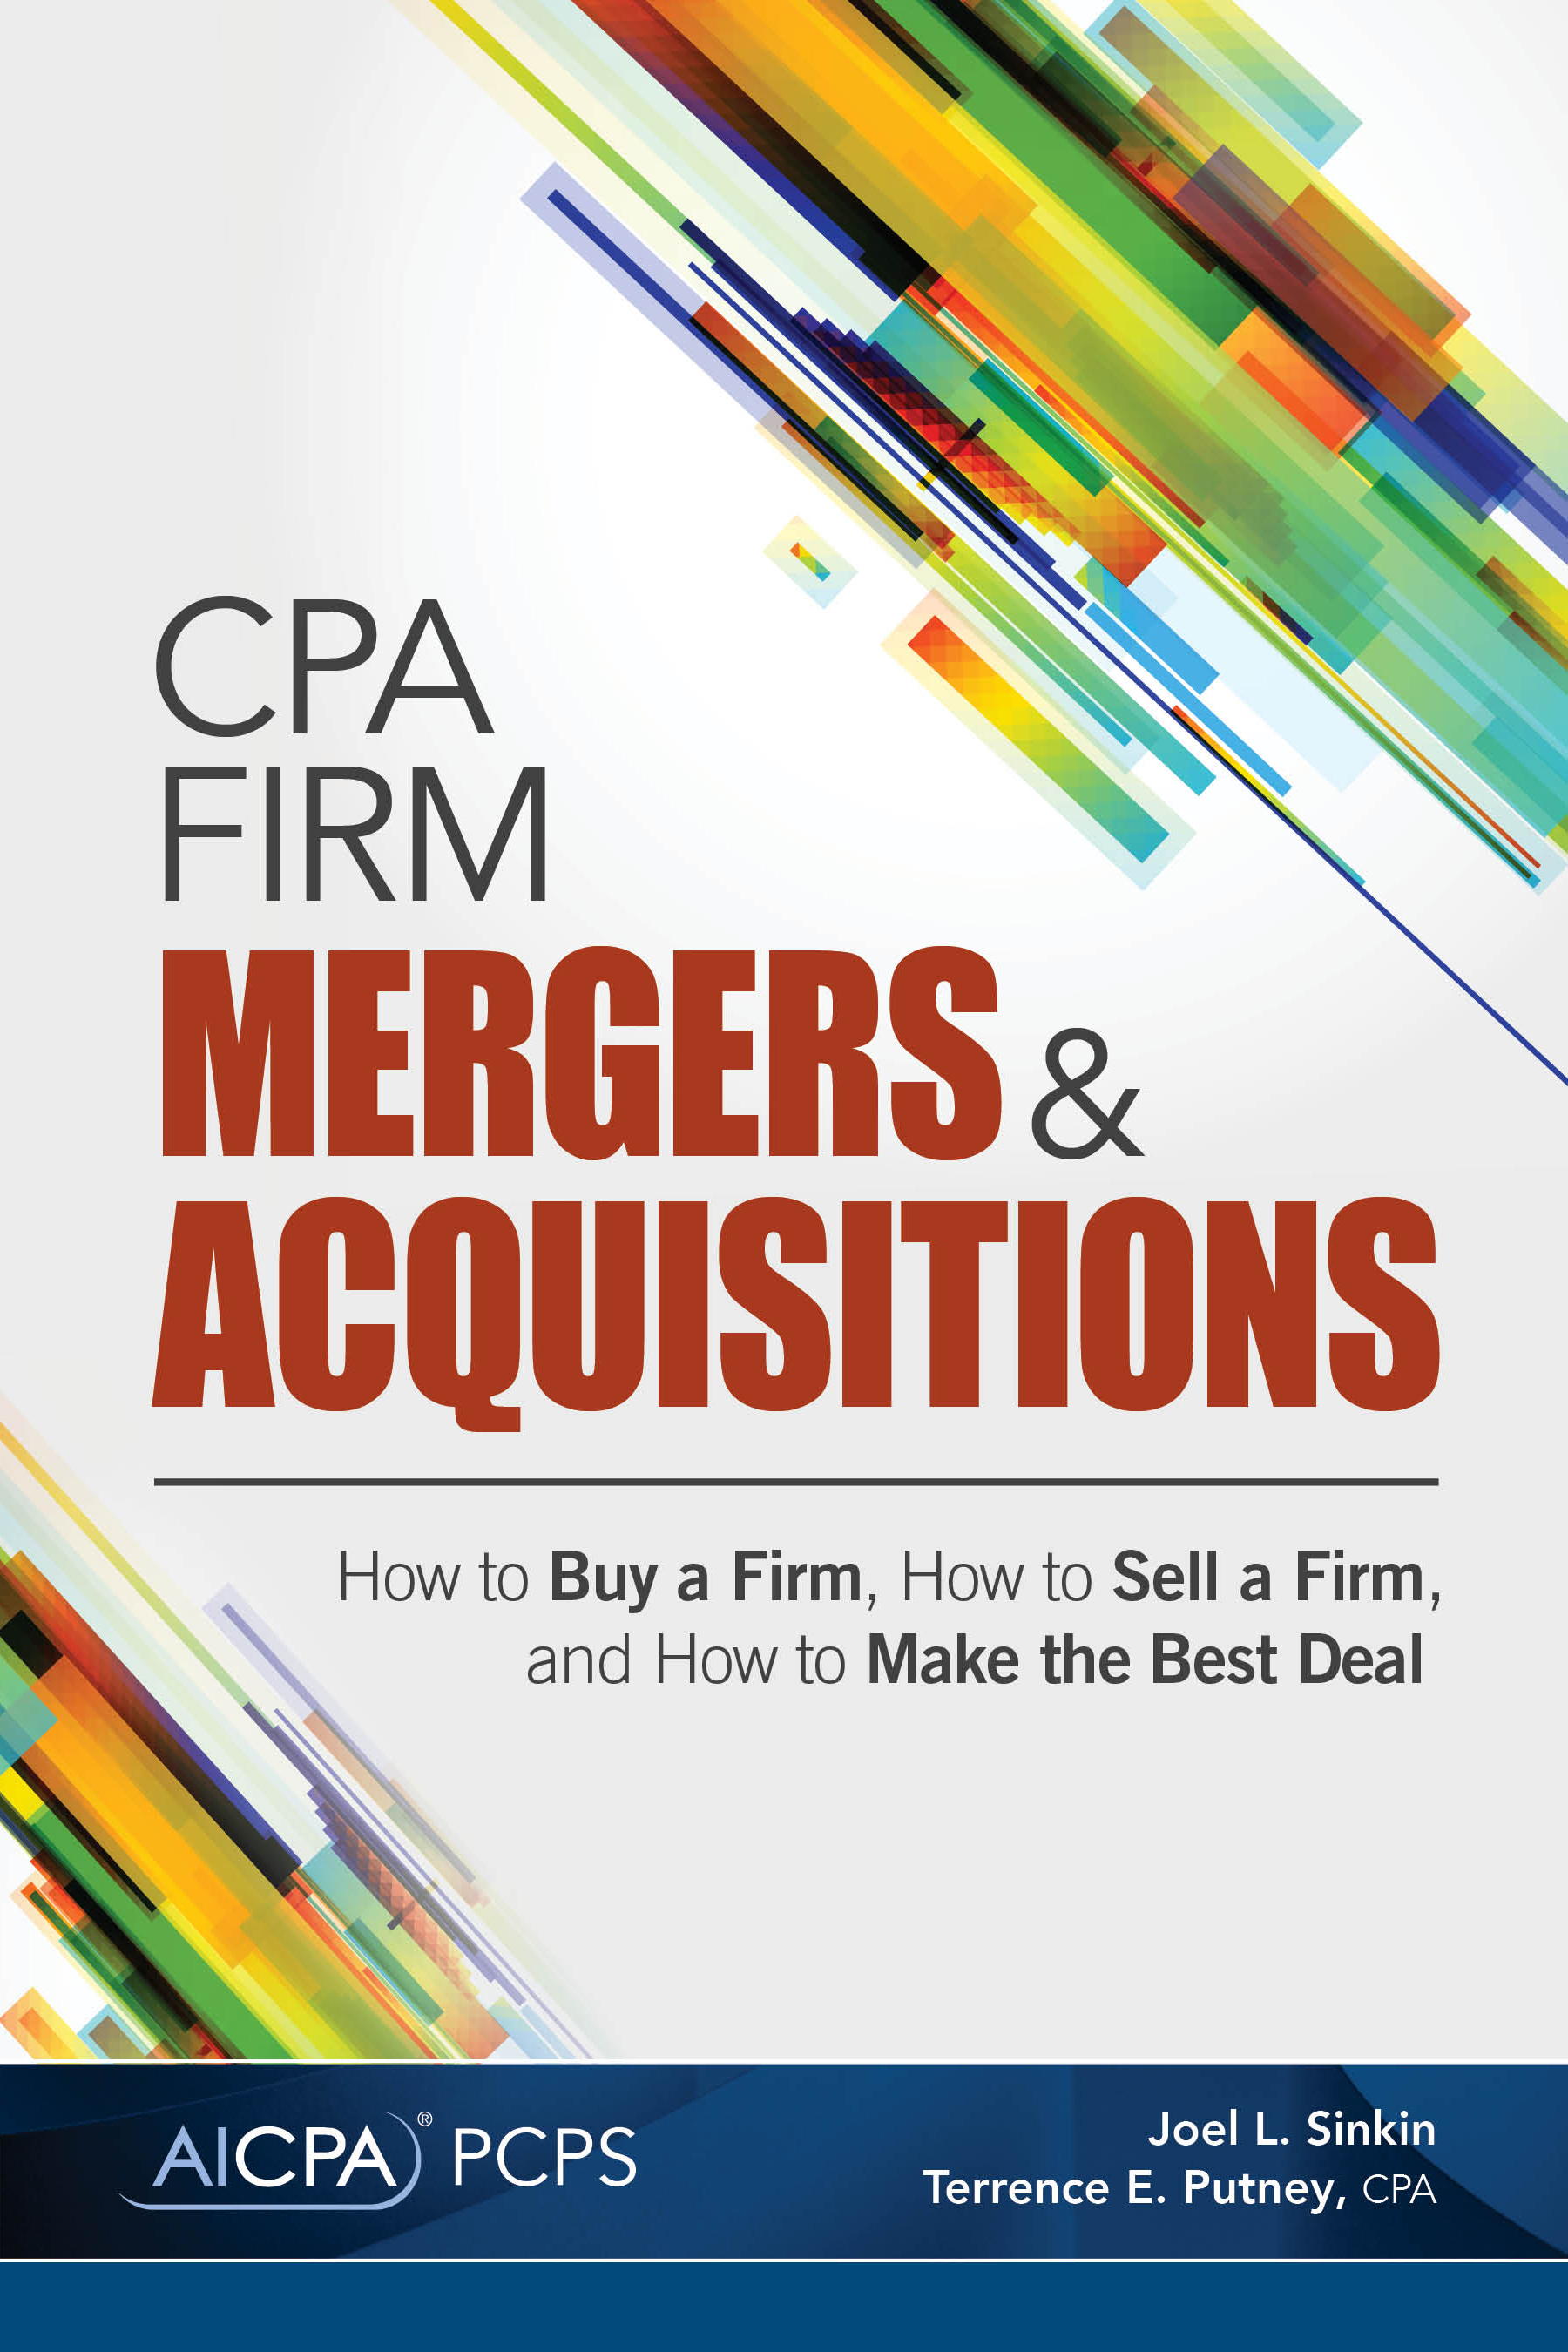 cpa firm-mergers-acquisitions